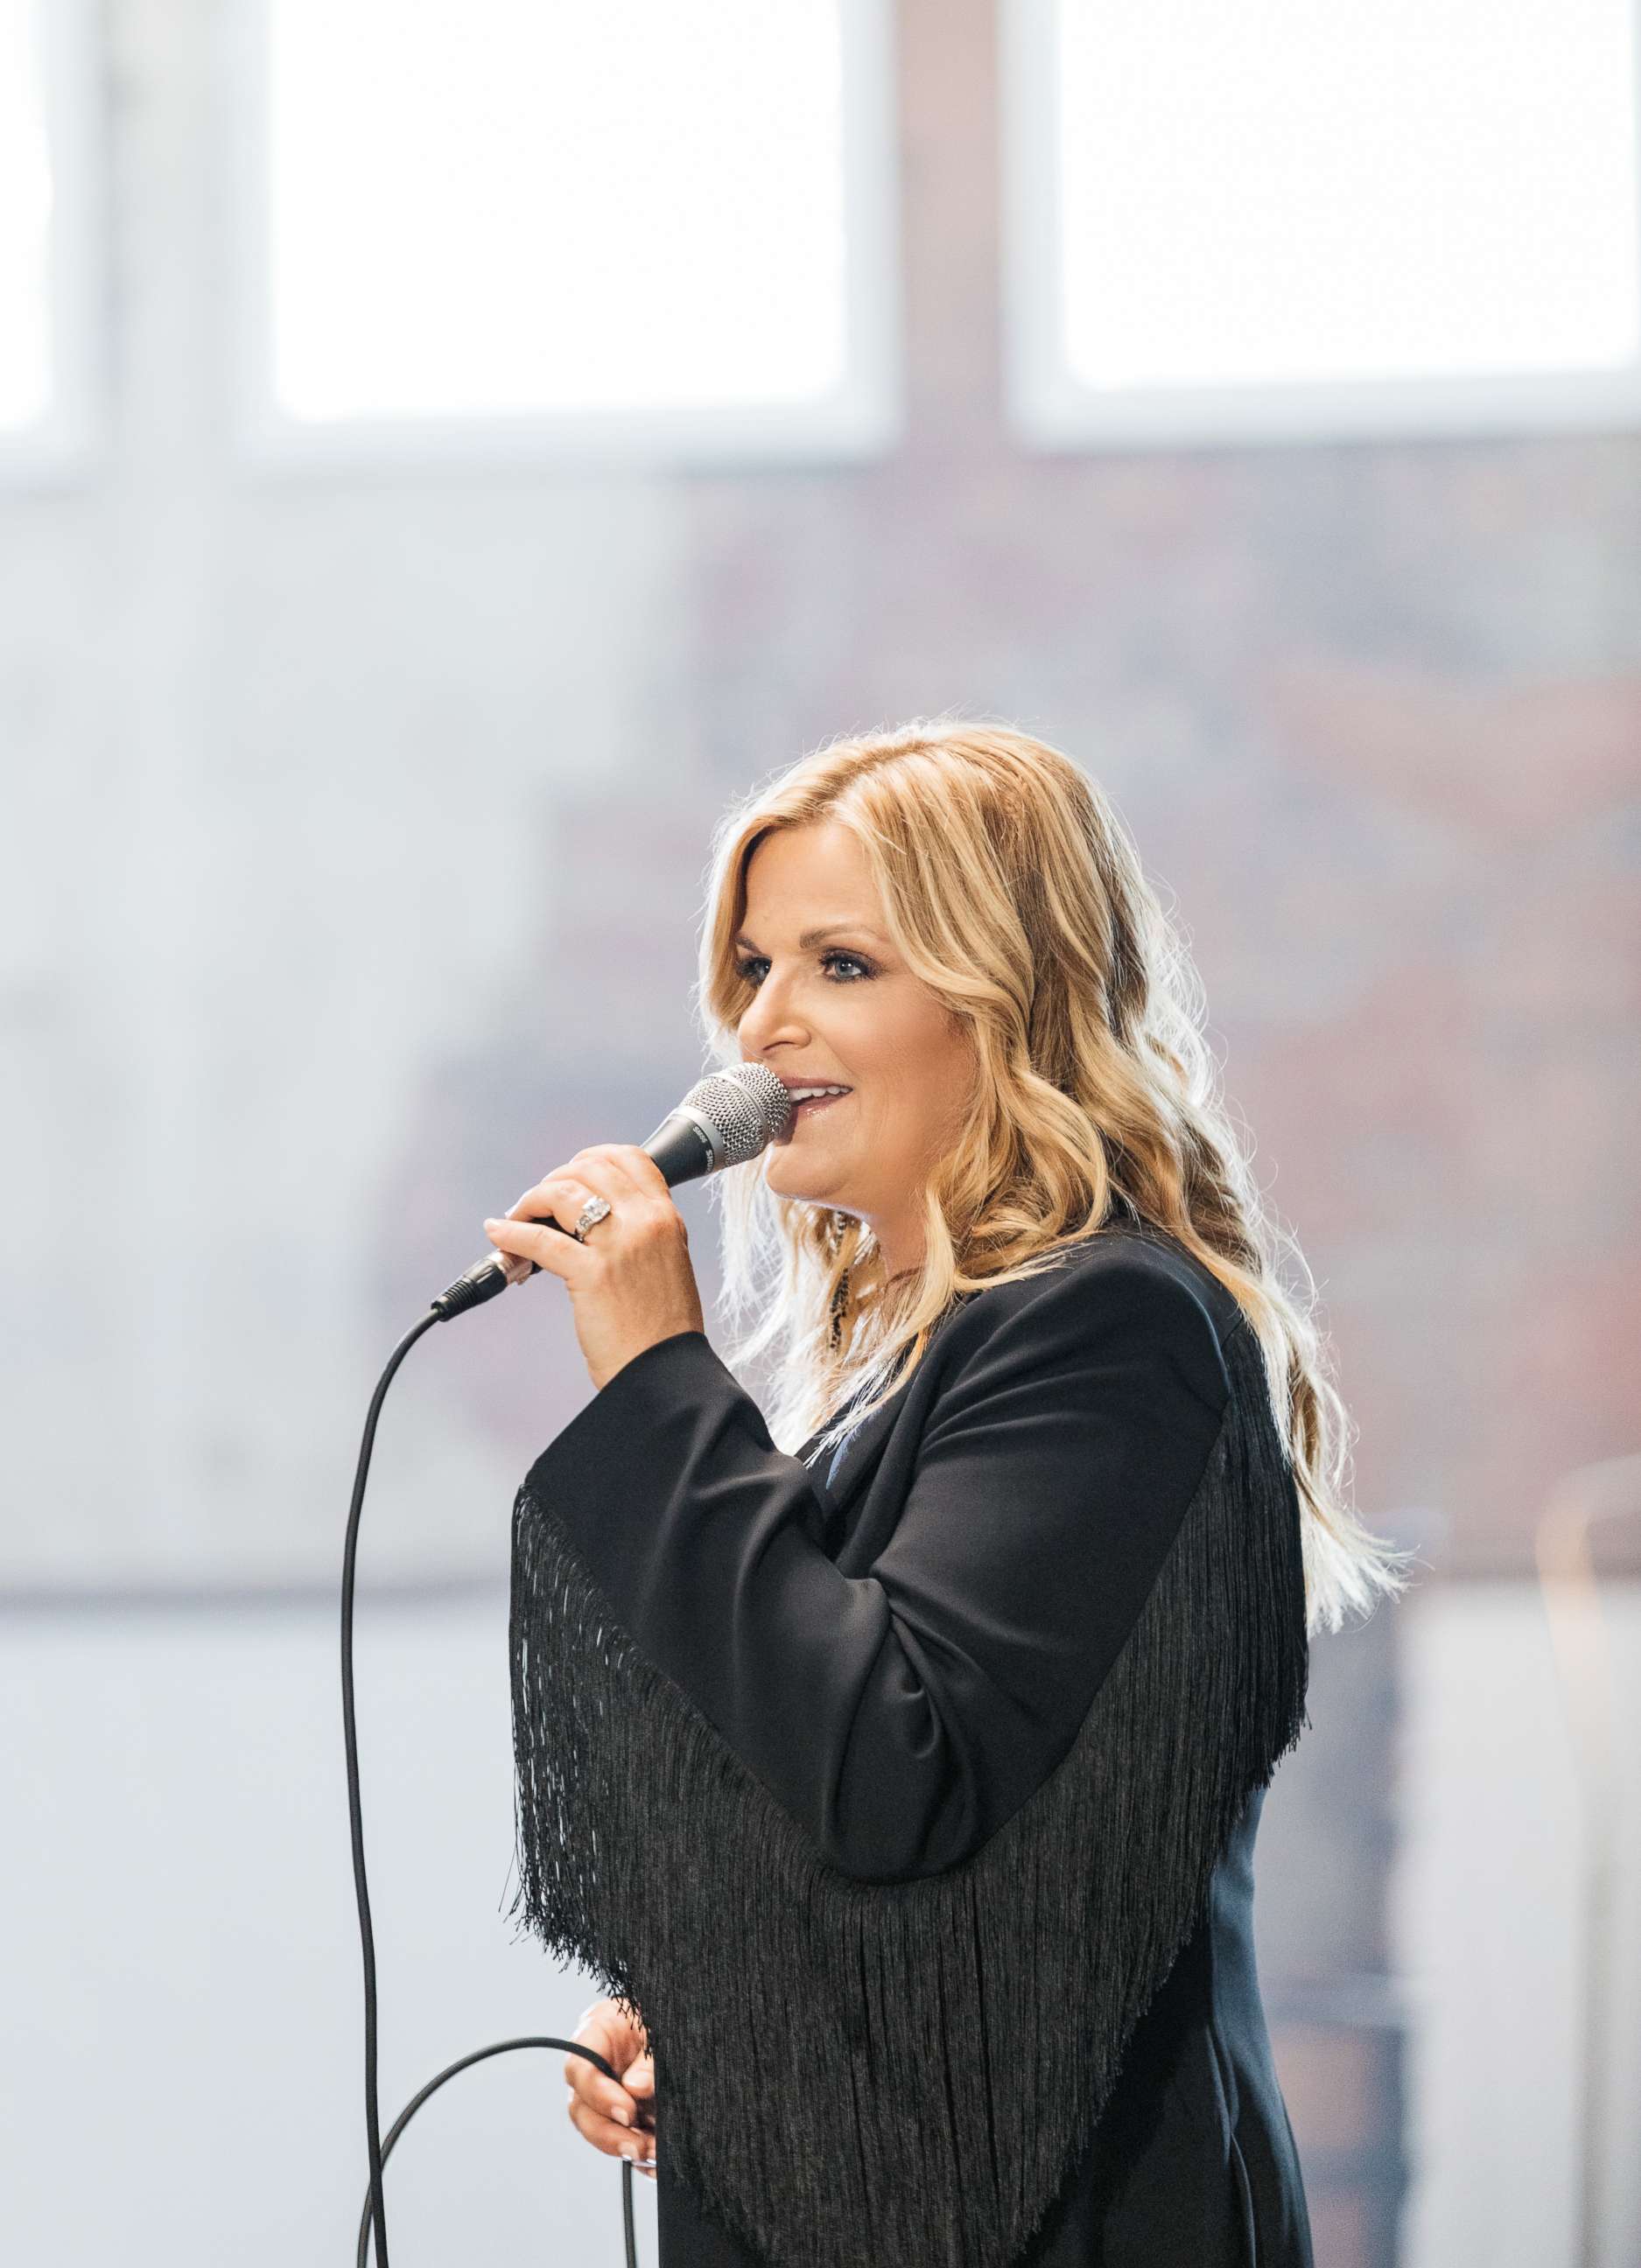 PHOTO: Trisha Yearwood is partnering with songwriters Caitlyn Smith, Connie Harrington and Erik Dylan for Cracker Barrel Old Country Store's ï¿½Five Decades, One Voiceï¿½ program to honor women in country music.